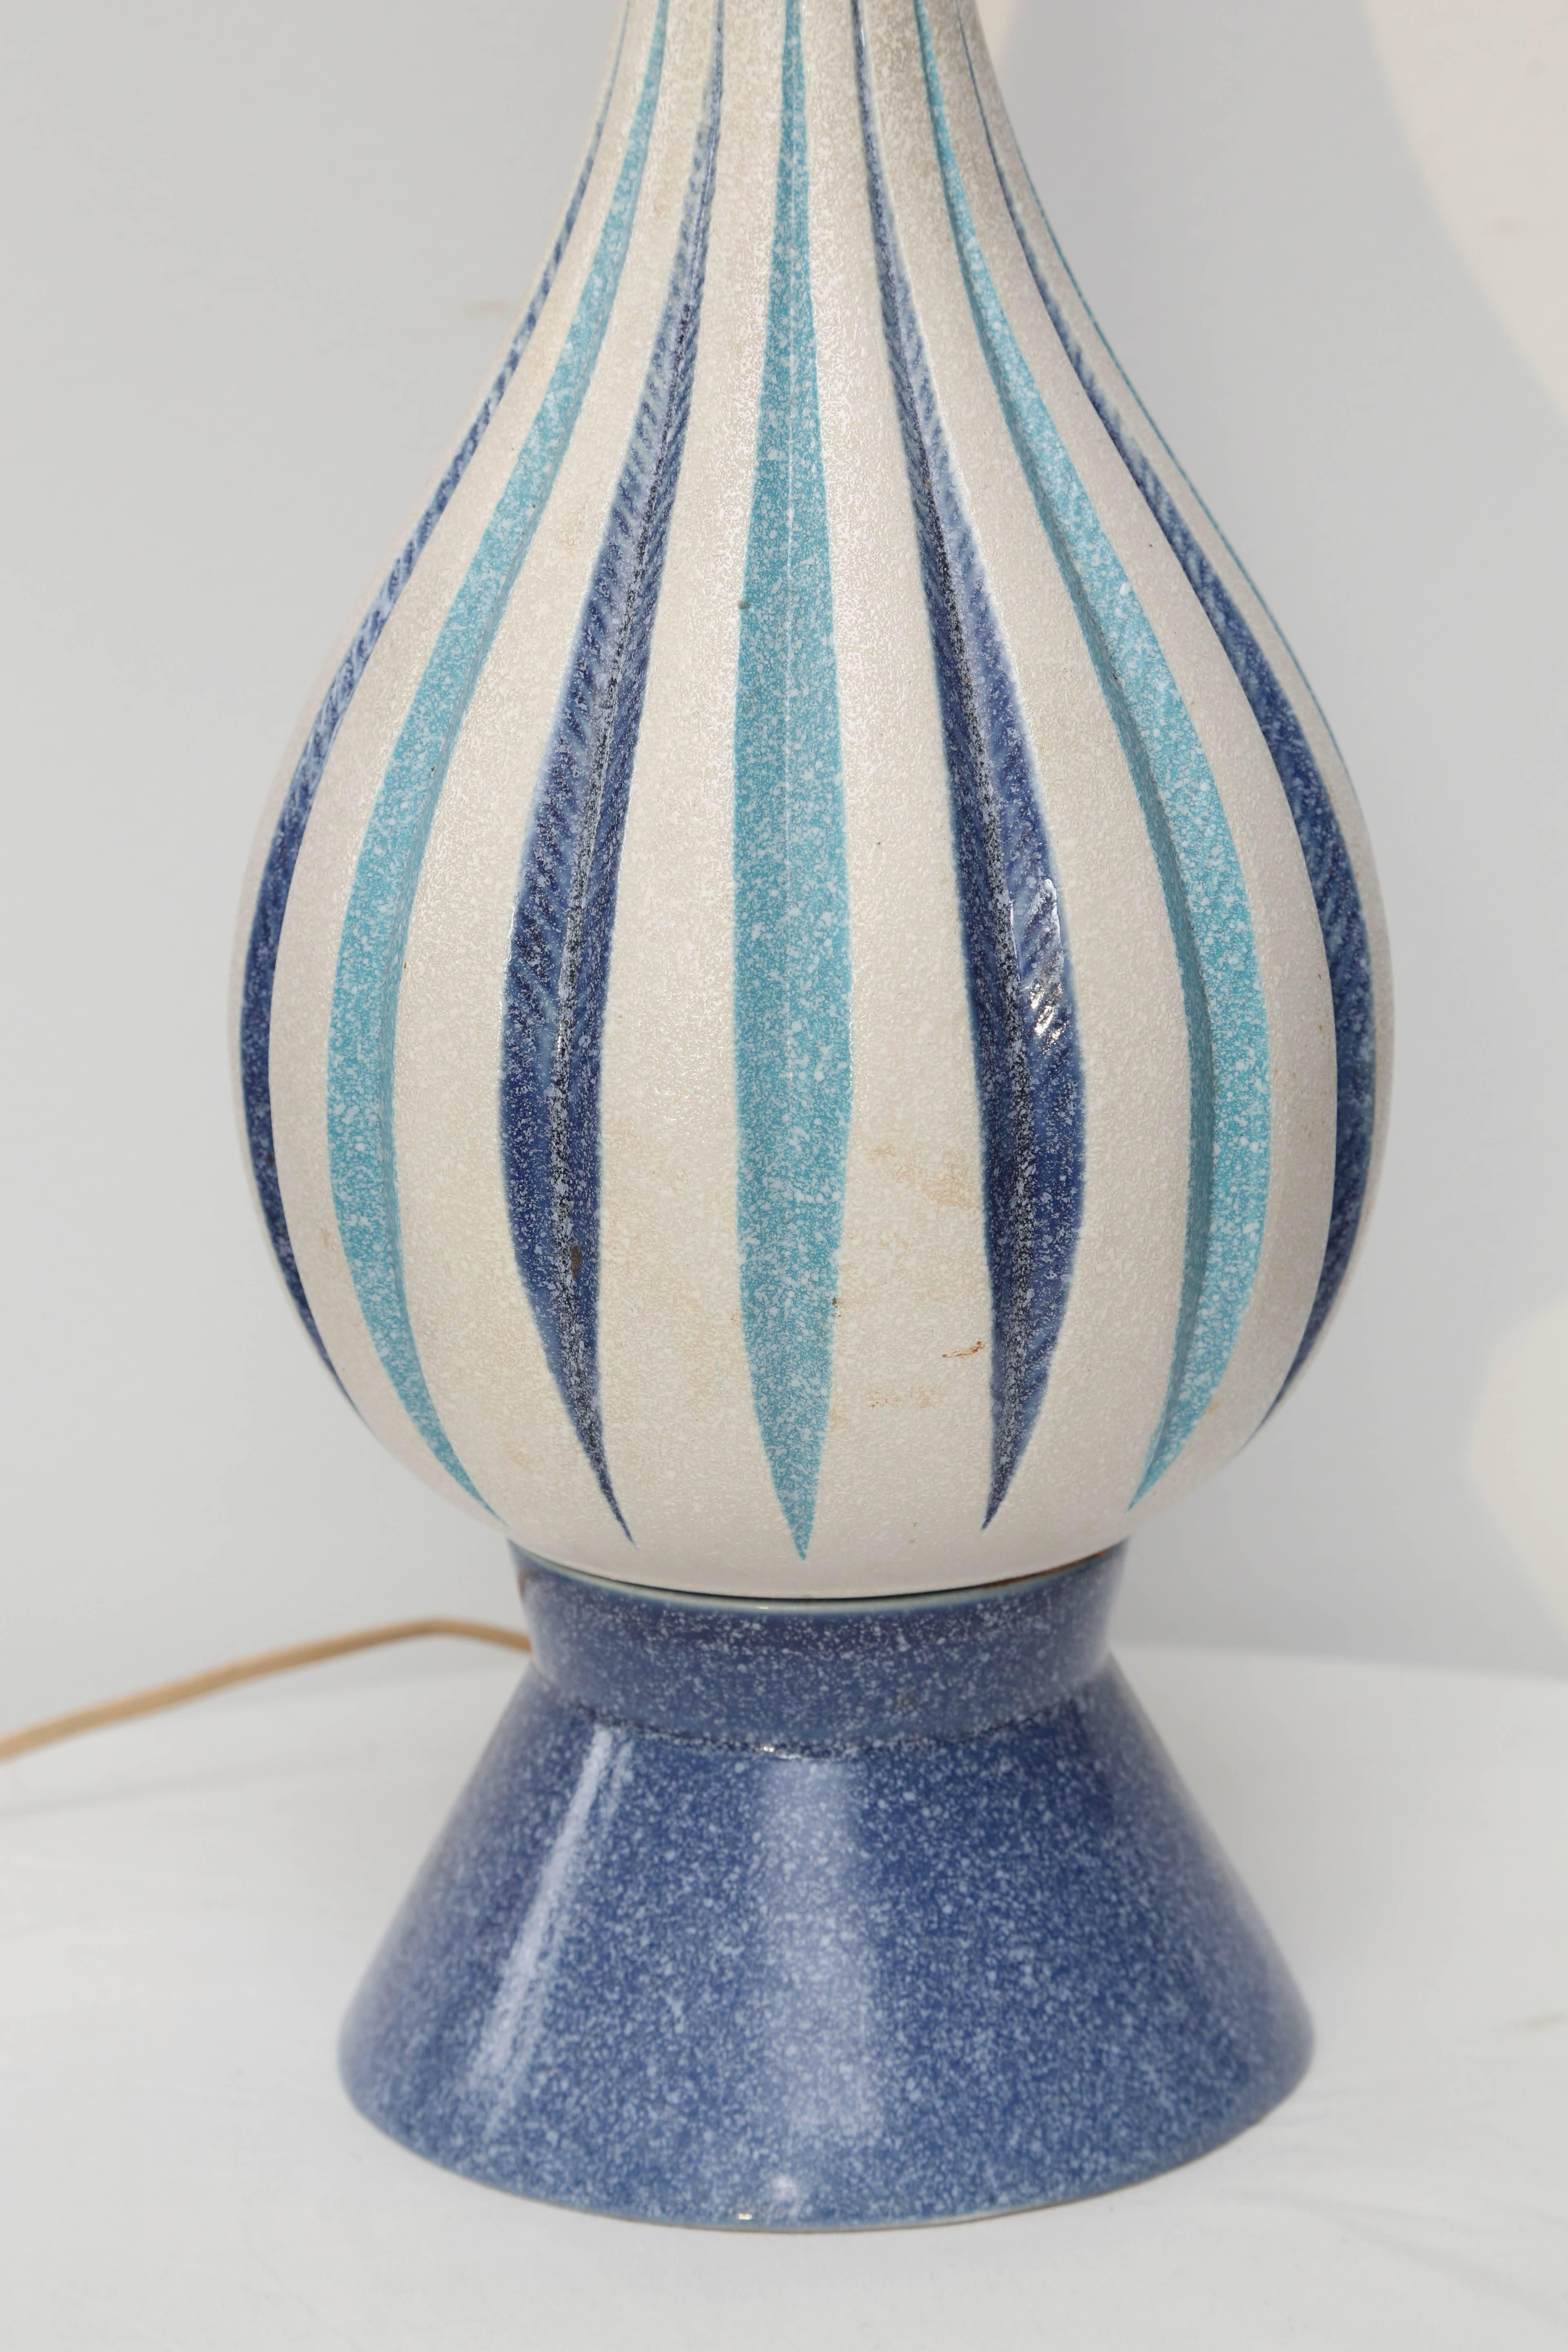 Fun blue ceramic lamp with wood accents.